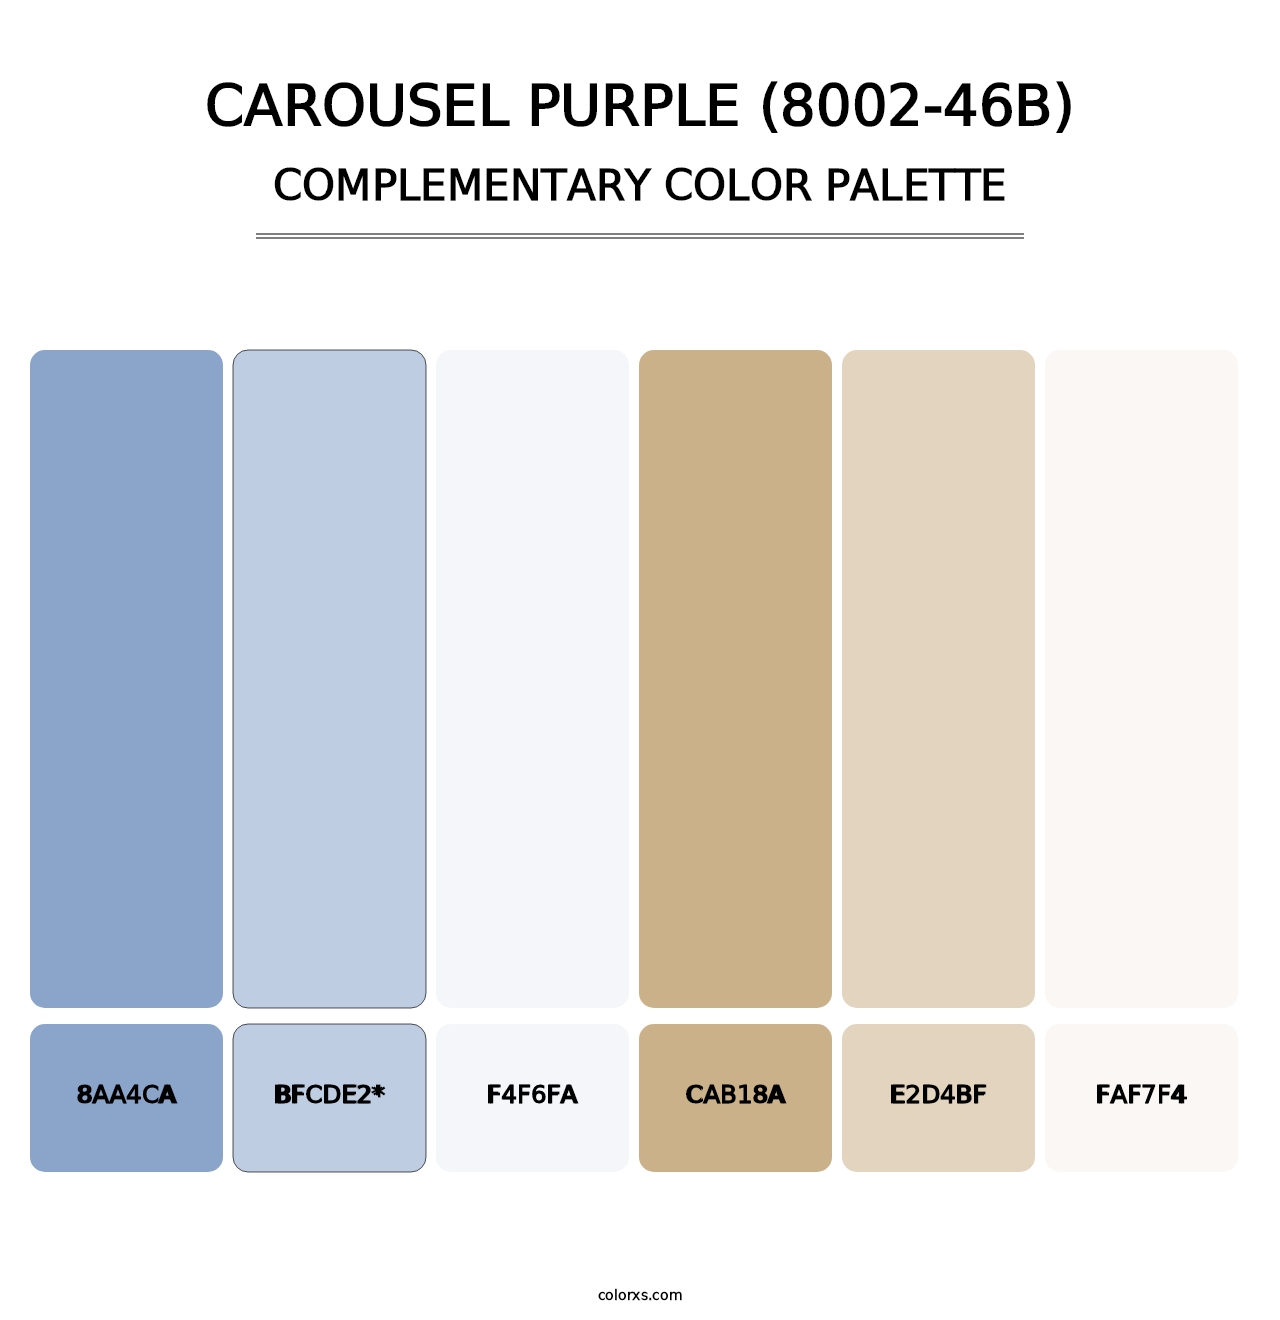 Carousel Purple (8002-46B) - Complementary Color Palette